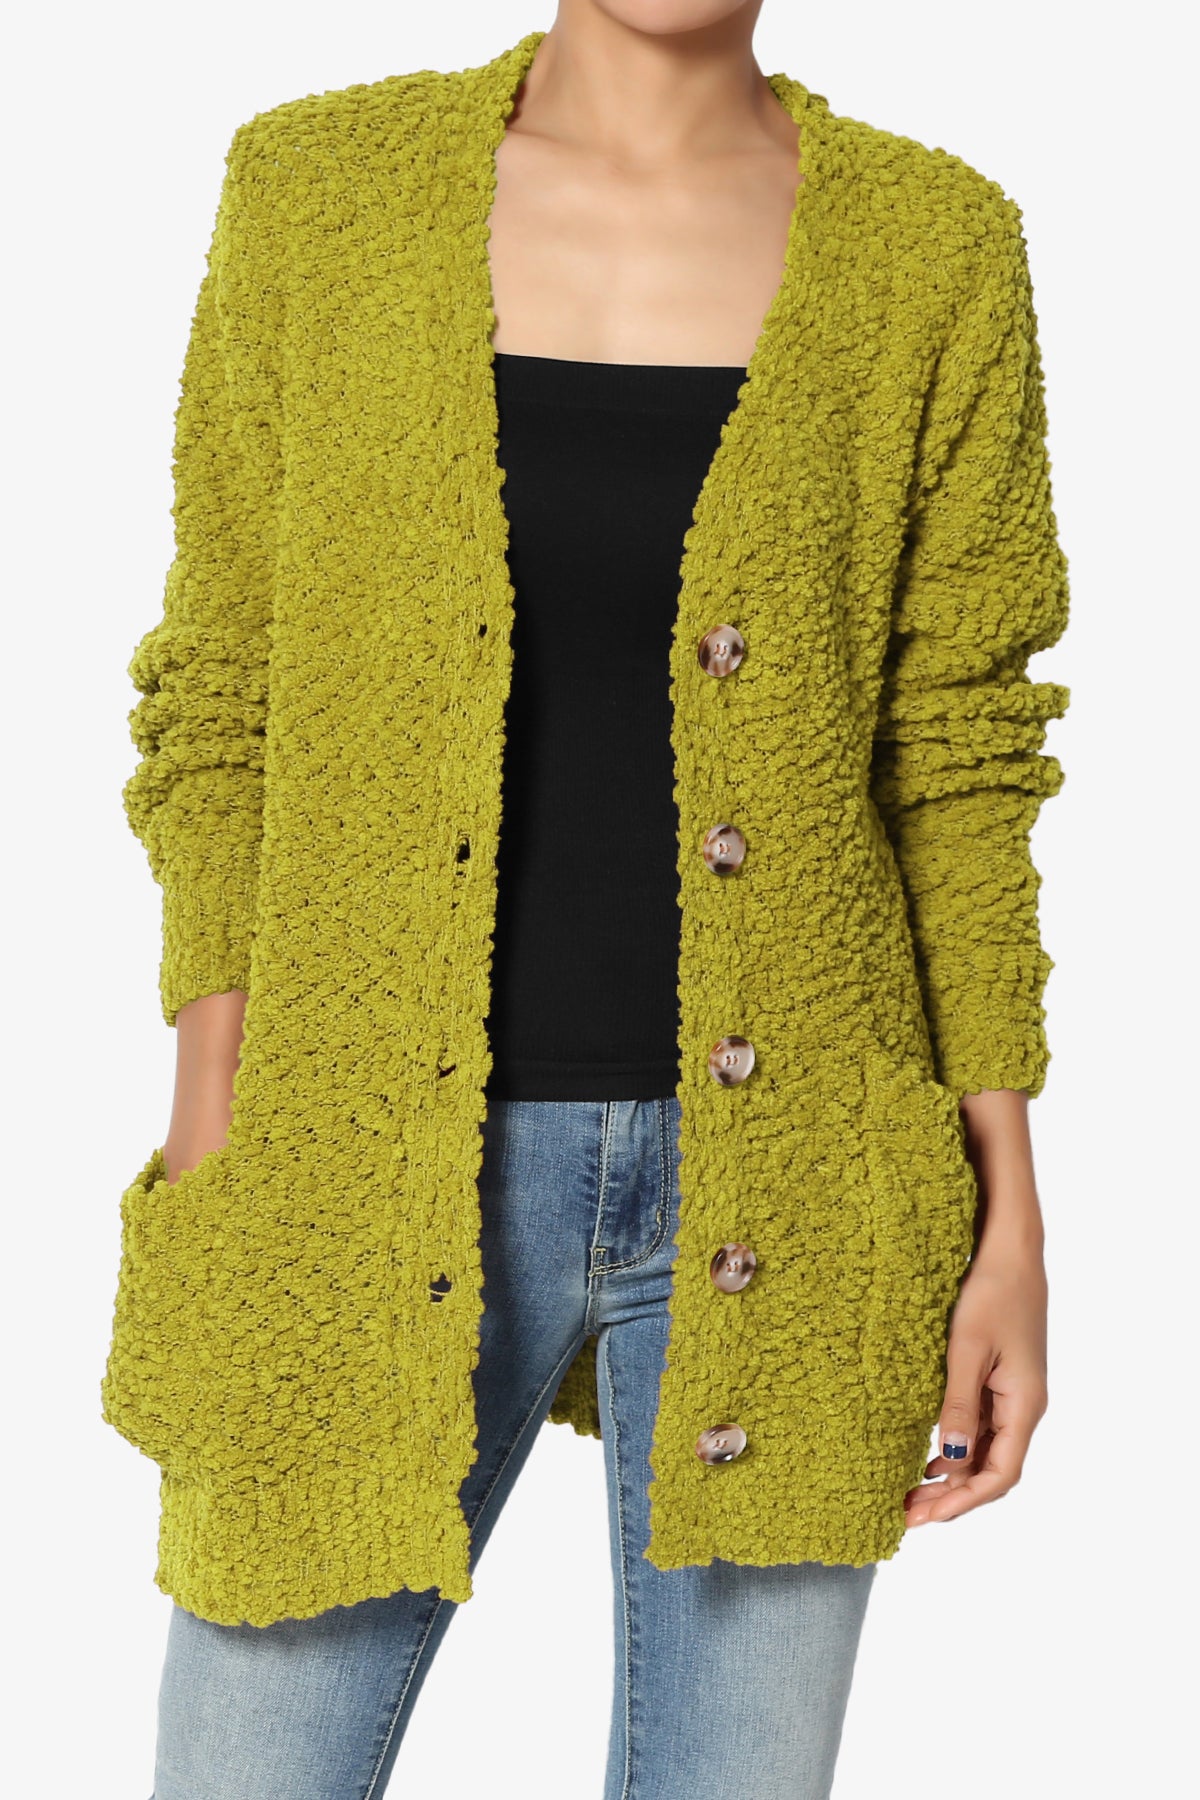 Barry Button Teddy Knit Sweater Cardigan OLIVE MUSTARD_1